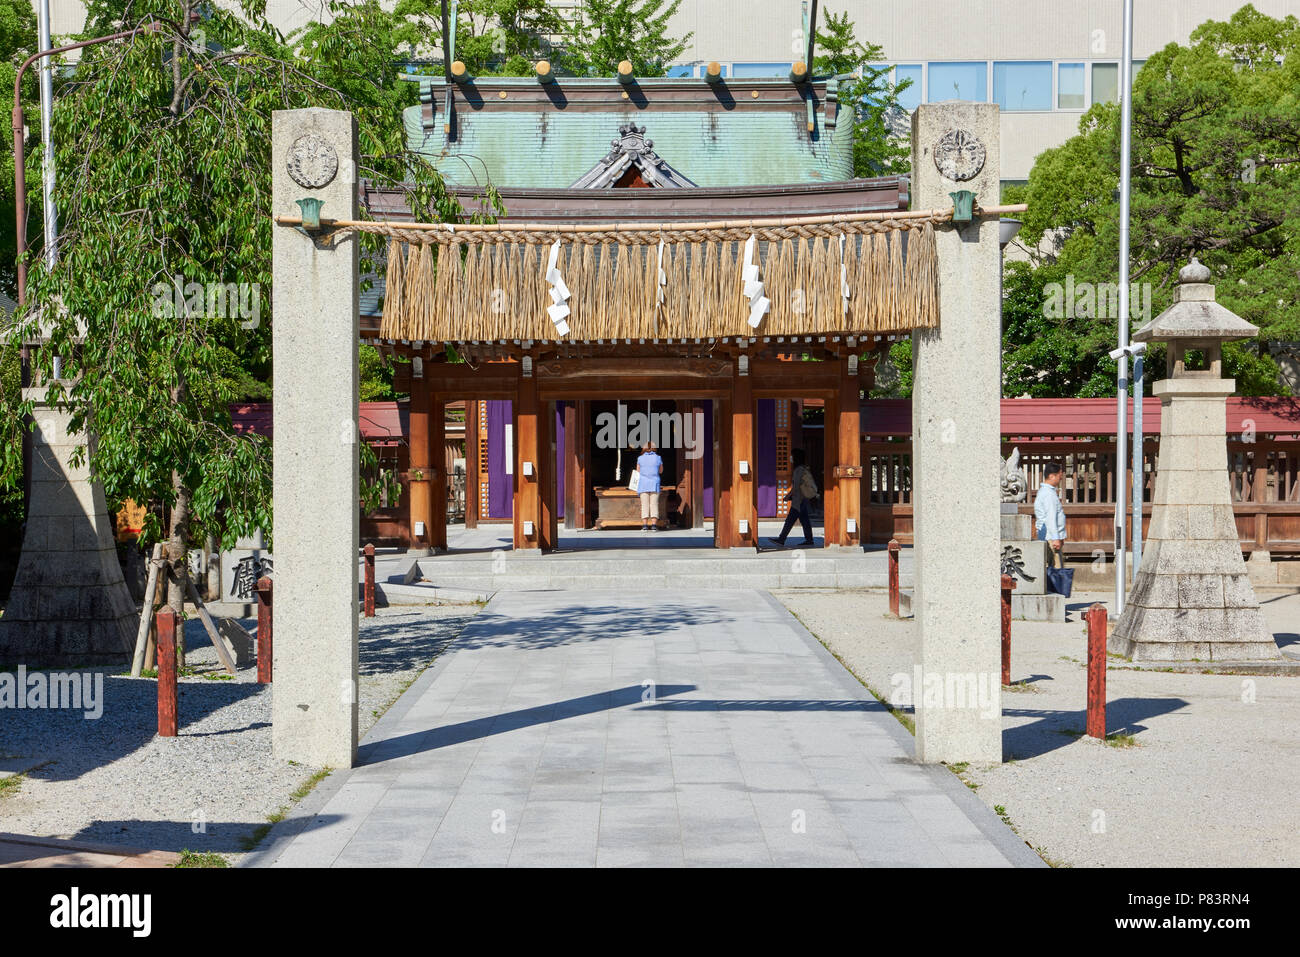 Torii stone gates in Kego Shrine  n Tenjin, central Fukuoka, Japan. The shrine is surrounded by busy streets and modern buildings. Stock Photo